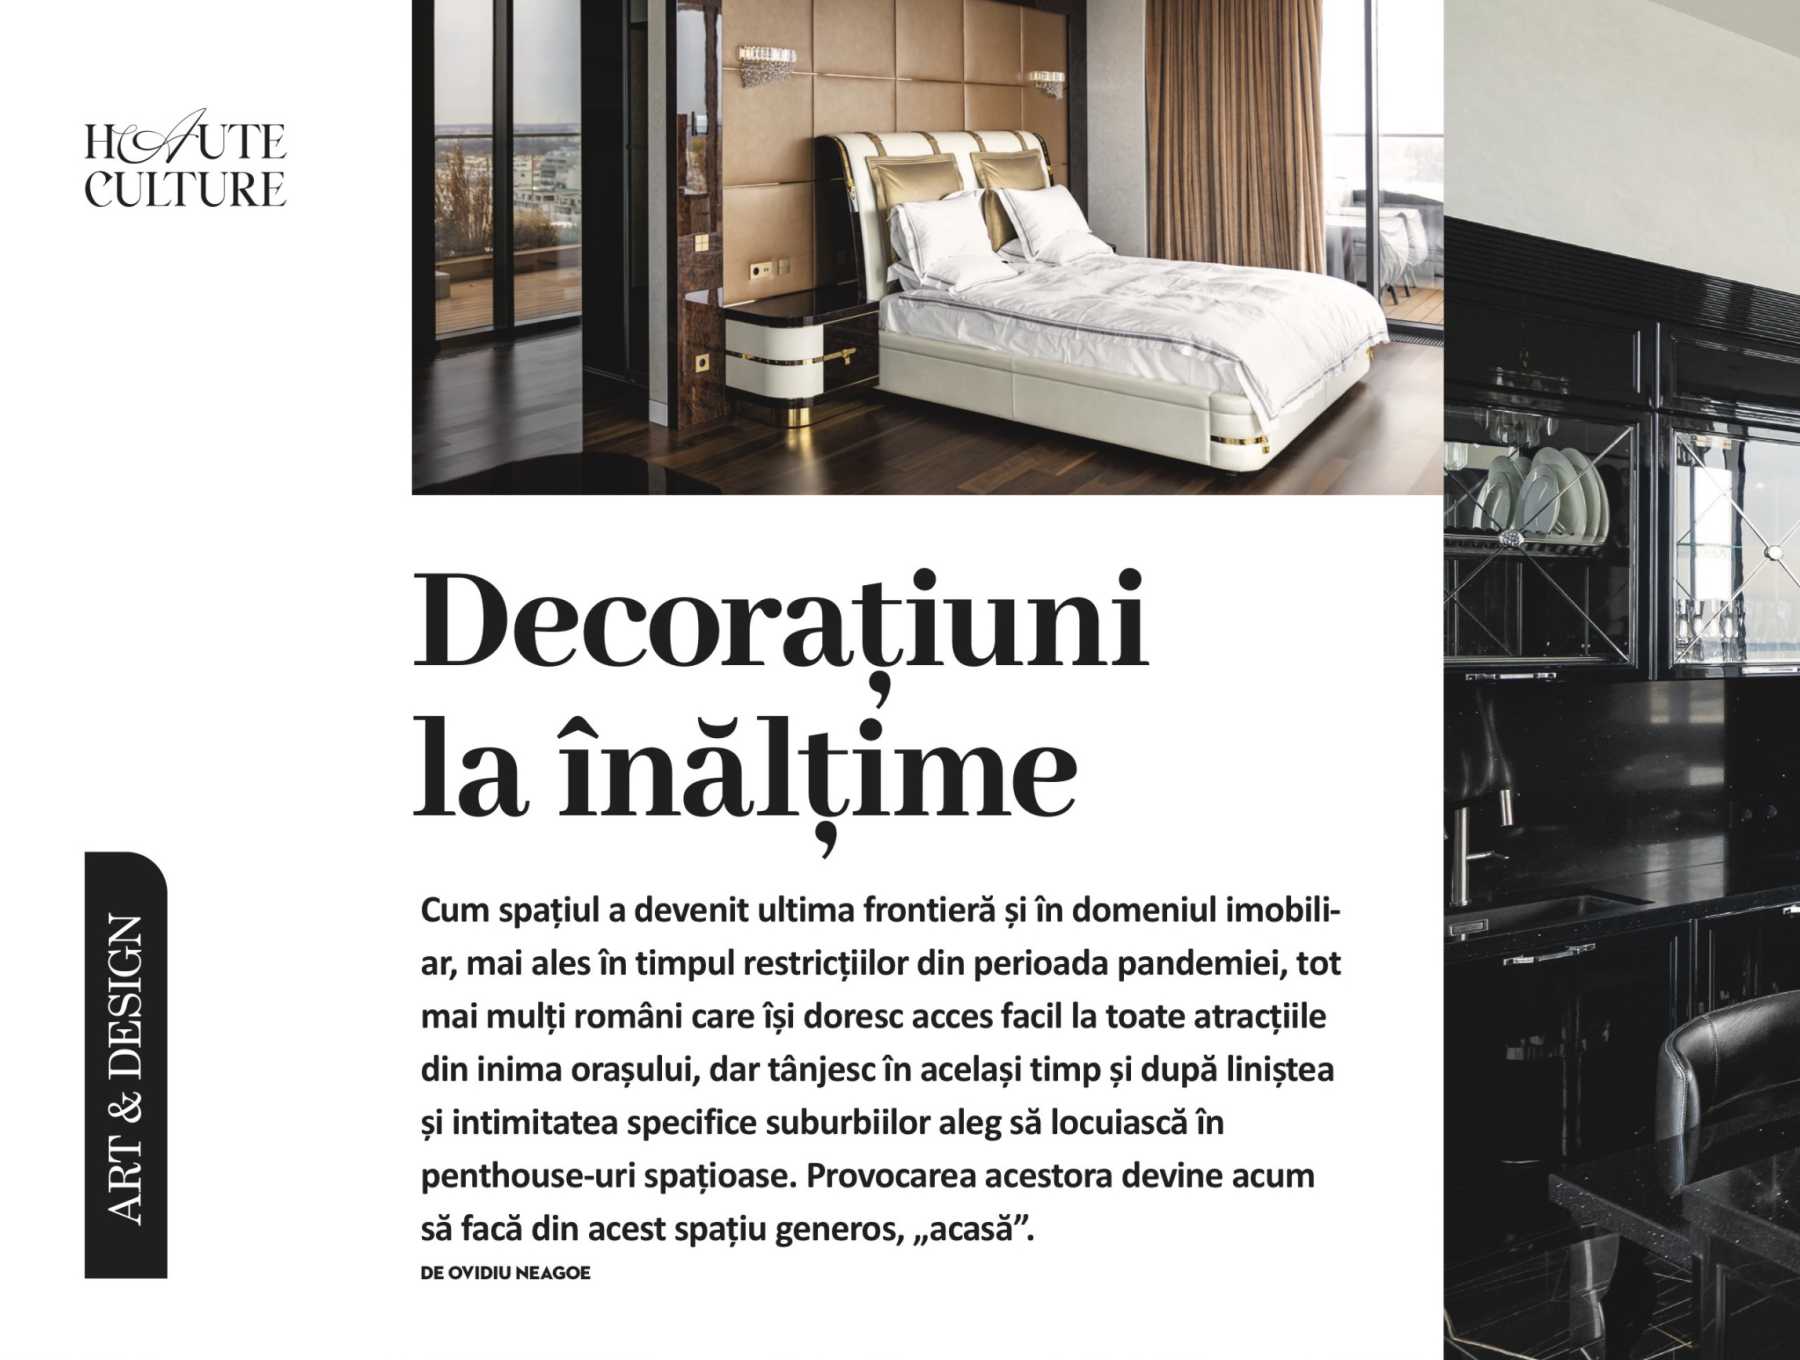 Lemon Interior – high-end design in the debut issue of Haute Culture magazine